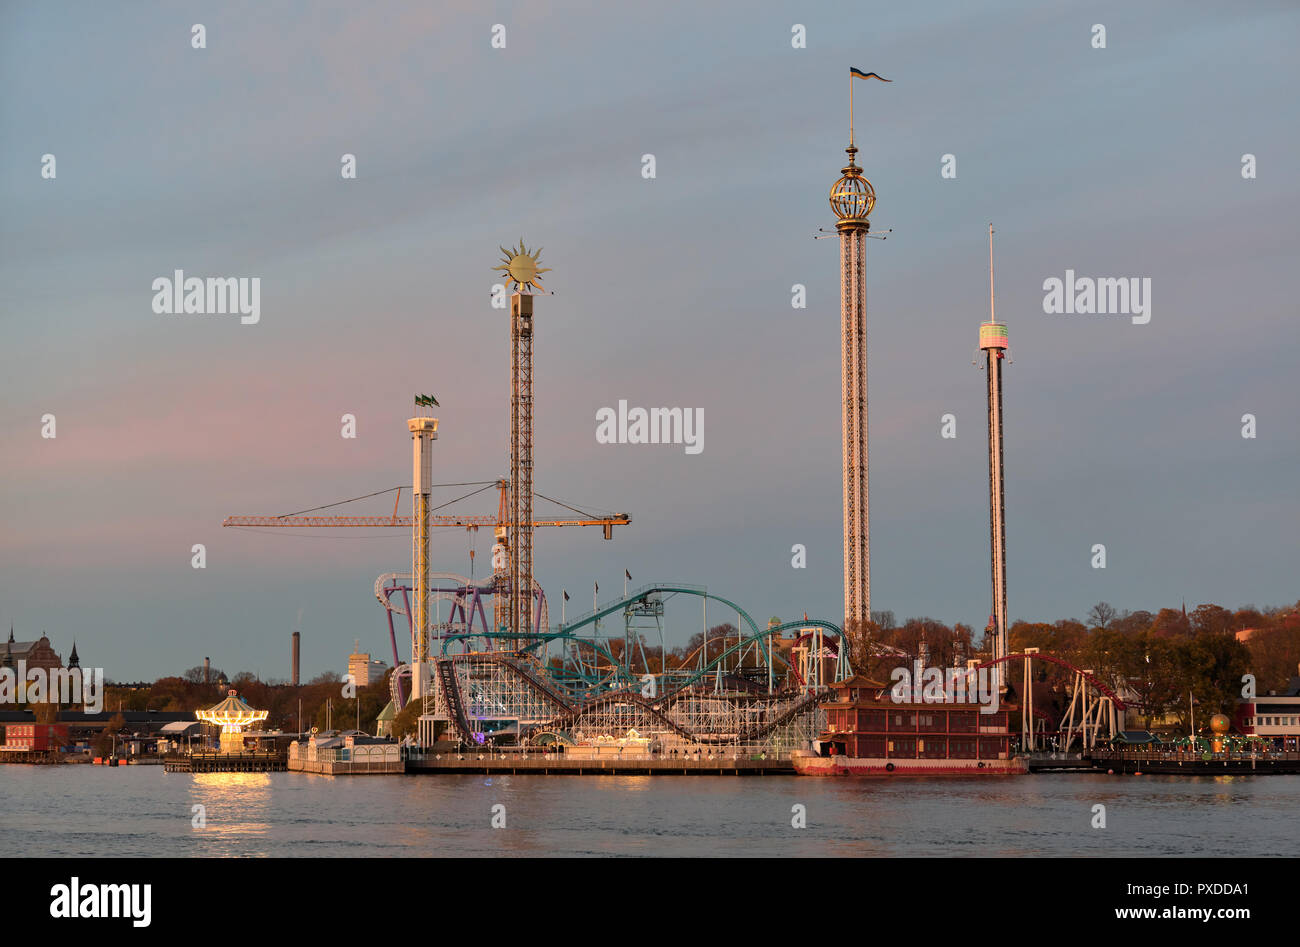 Gröna Lund in Stockhom, Sweden, from a boat Stock Photo